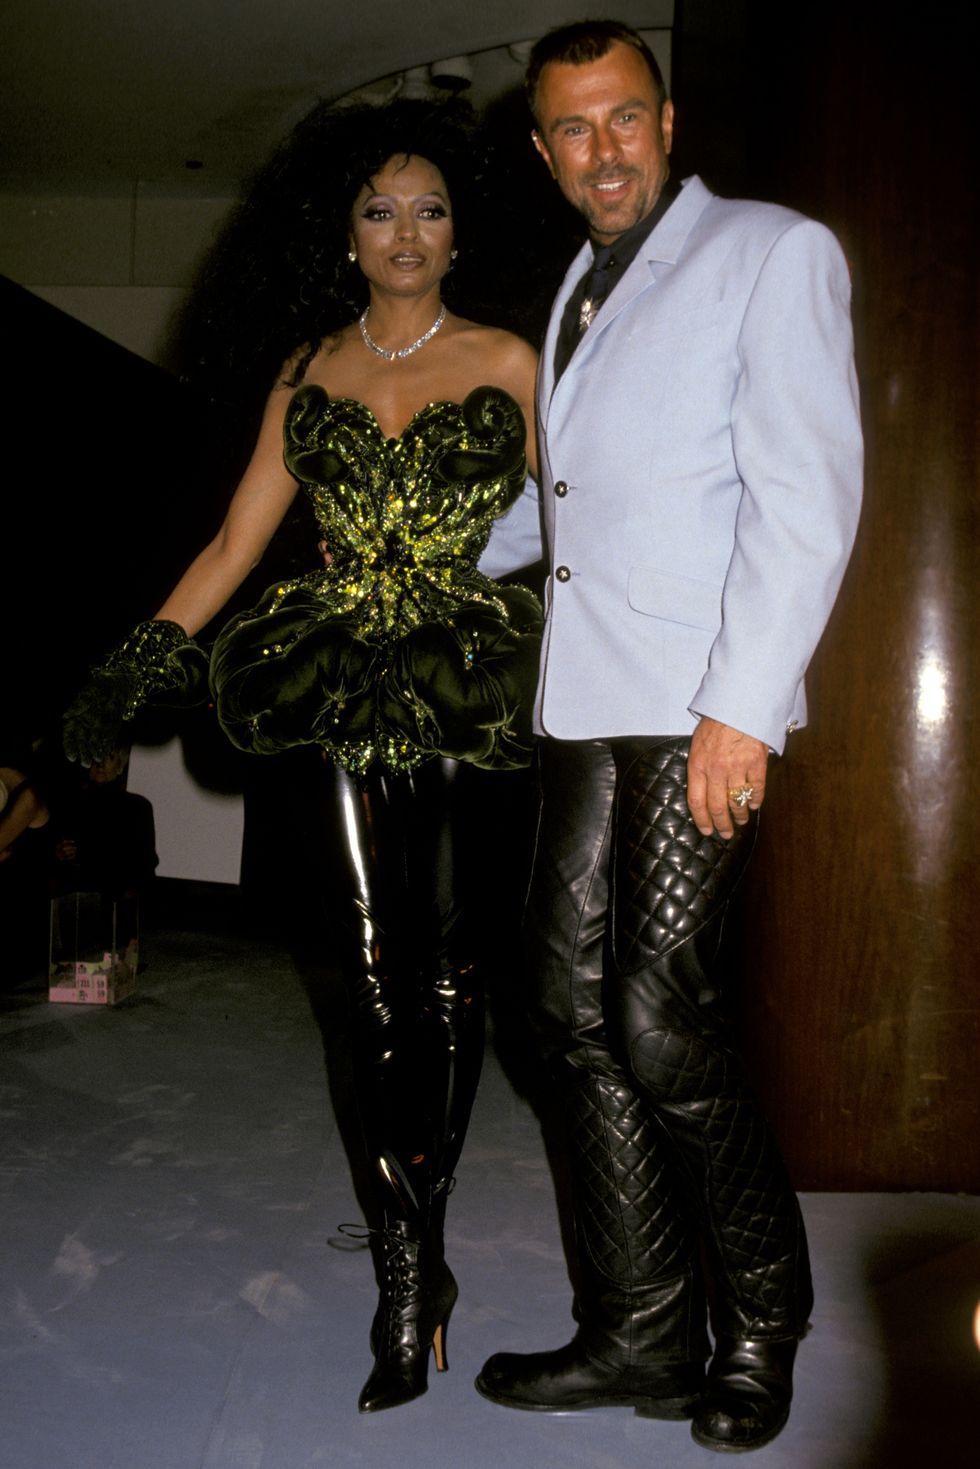 diana ross and thierry mugler photo by jim smealron galella collection via getty images